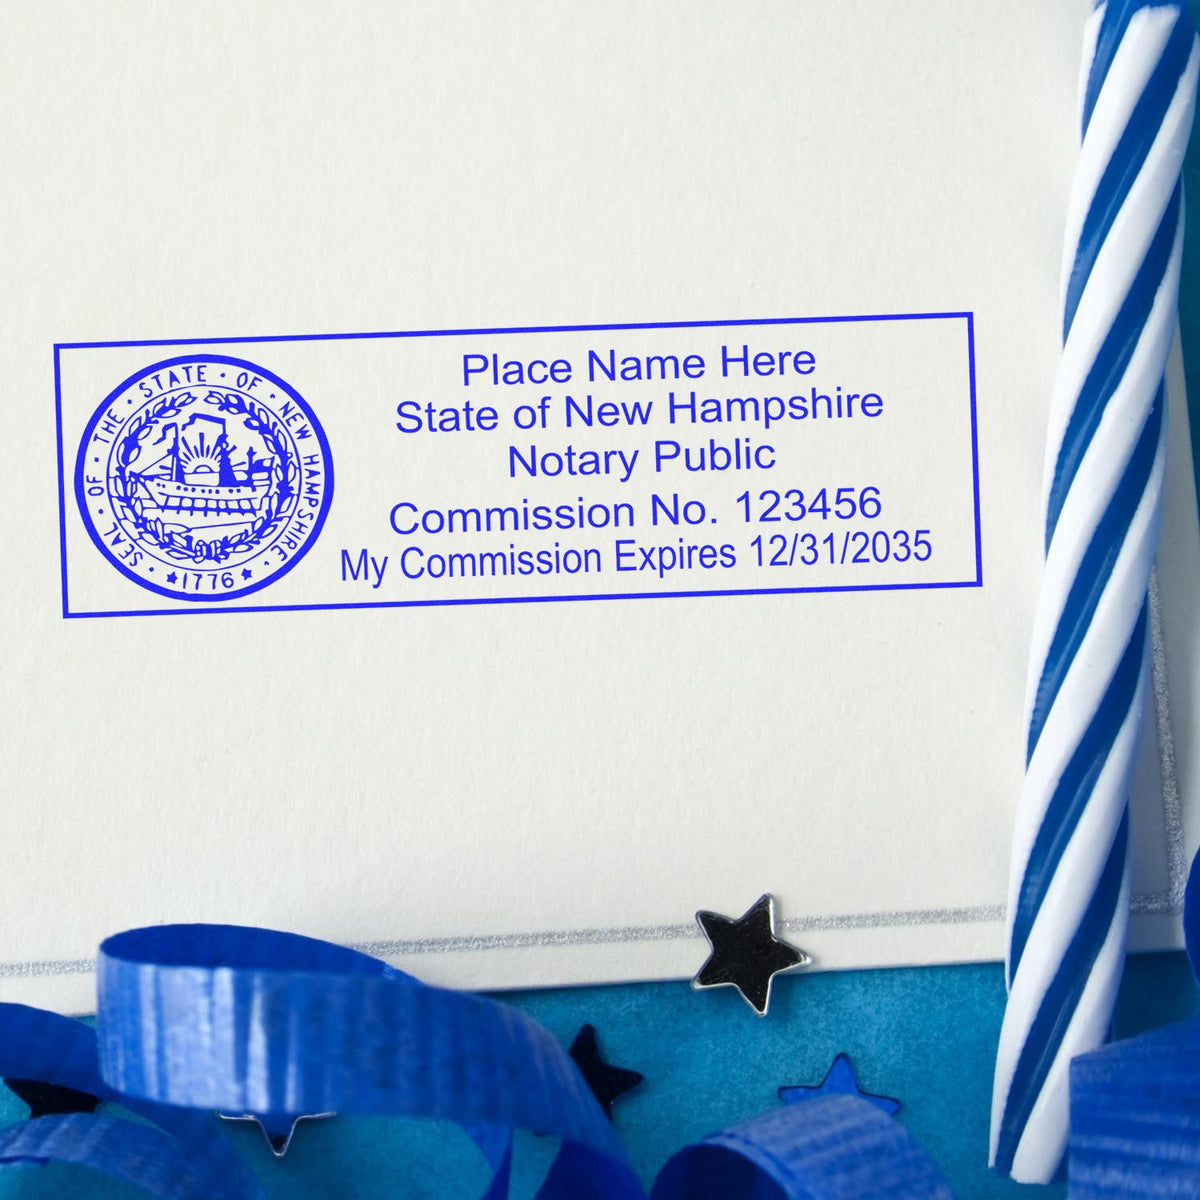 The MaxLight Premium Pre-Inked New Hampshire State Seal Notarial Stamp stamp impression comes to life with a crisp, detailed photo on paper - showcasing true professional quality.